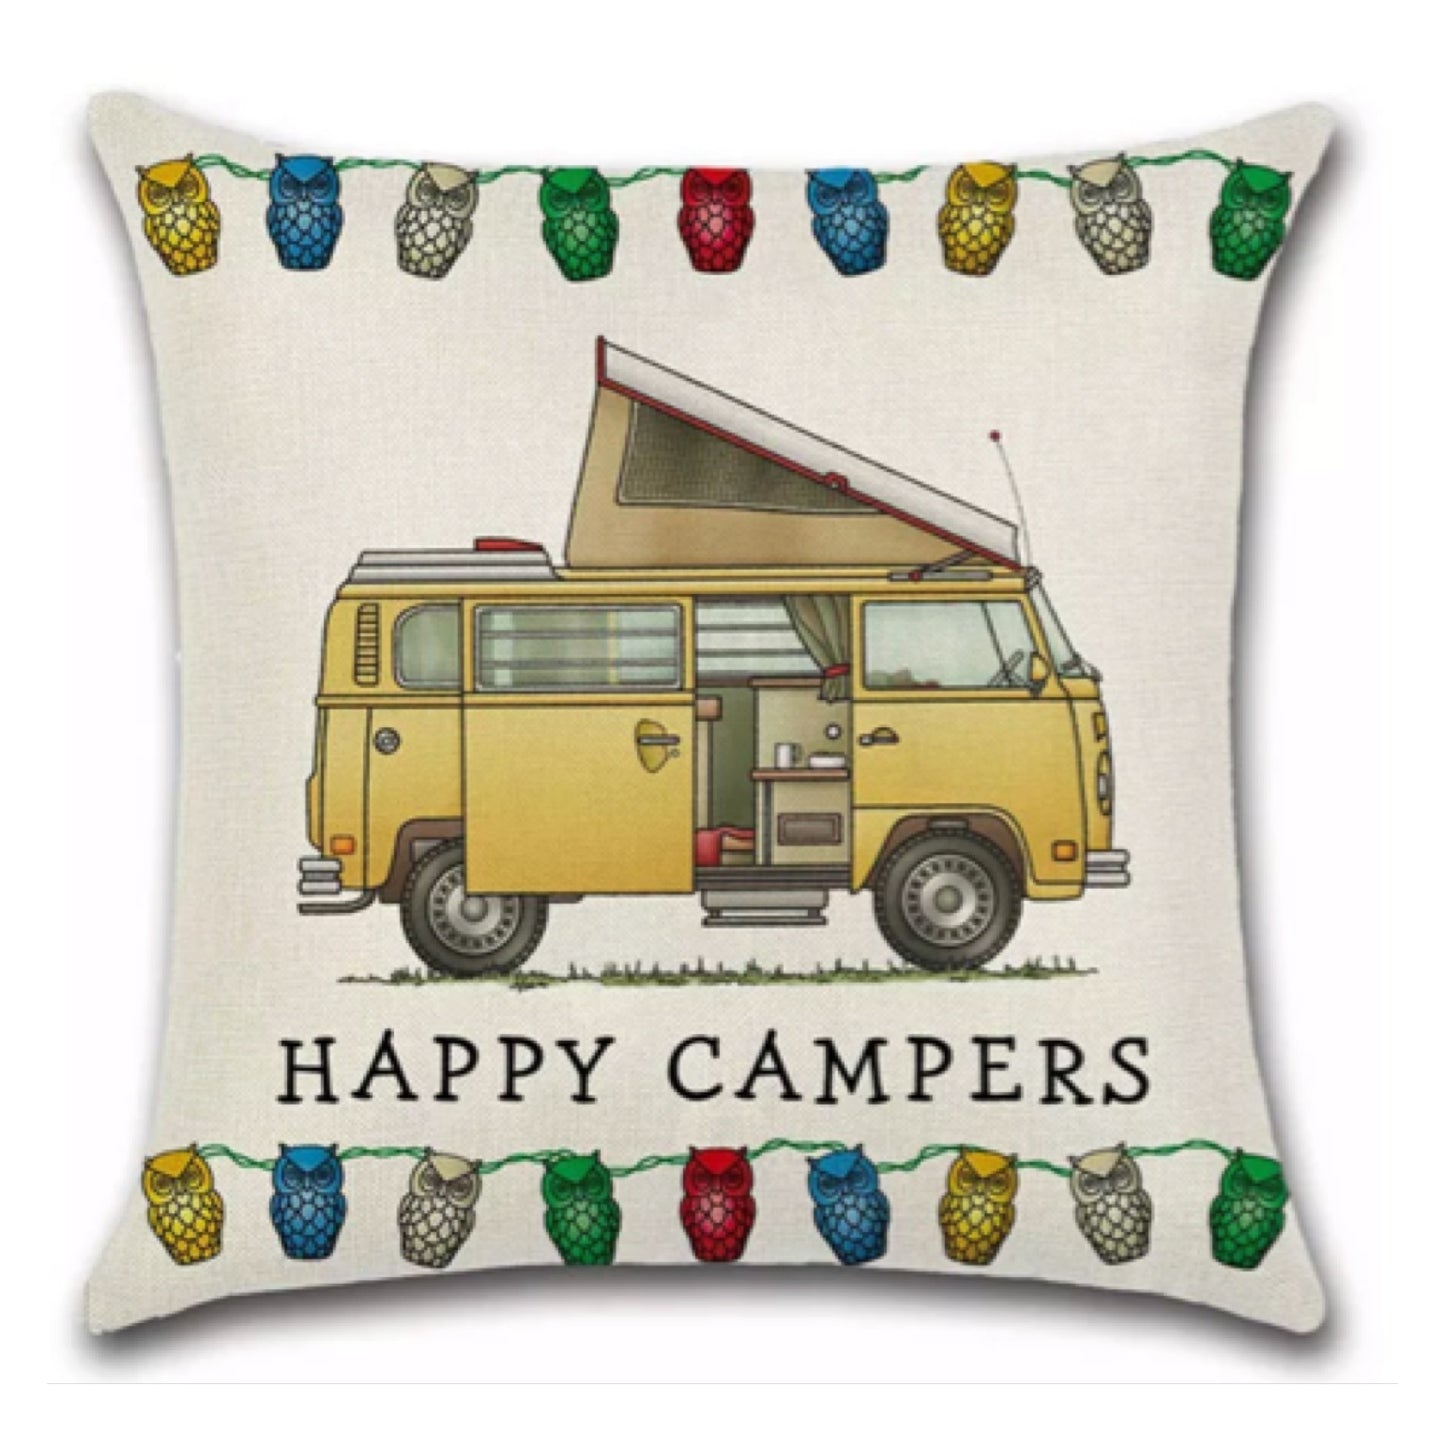 Cushion Cover Happy Campers Camper Van Vintage Yellow - The Renmy Store Homewares & Gifts 